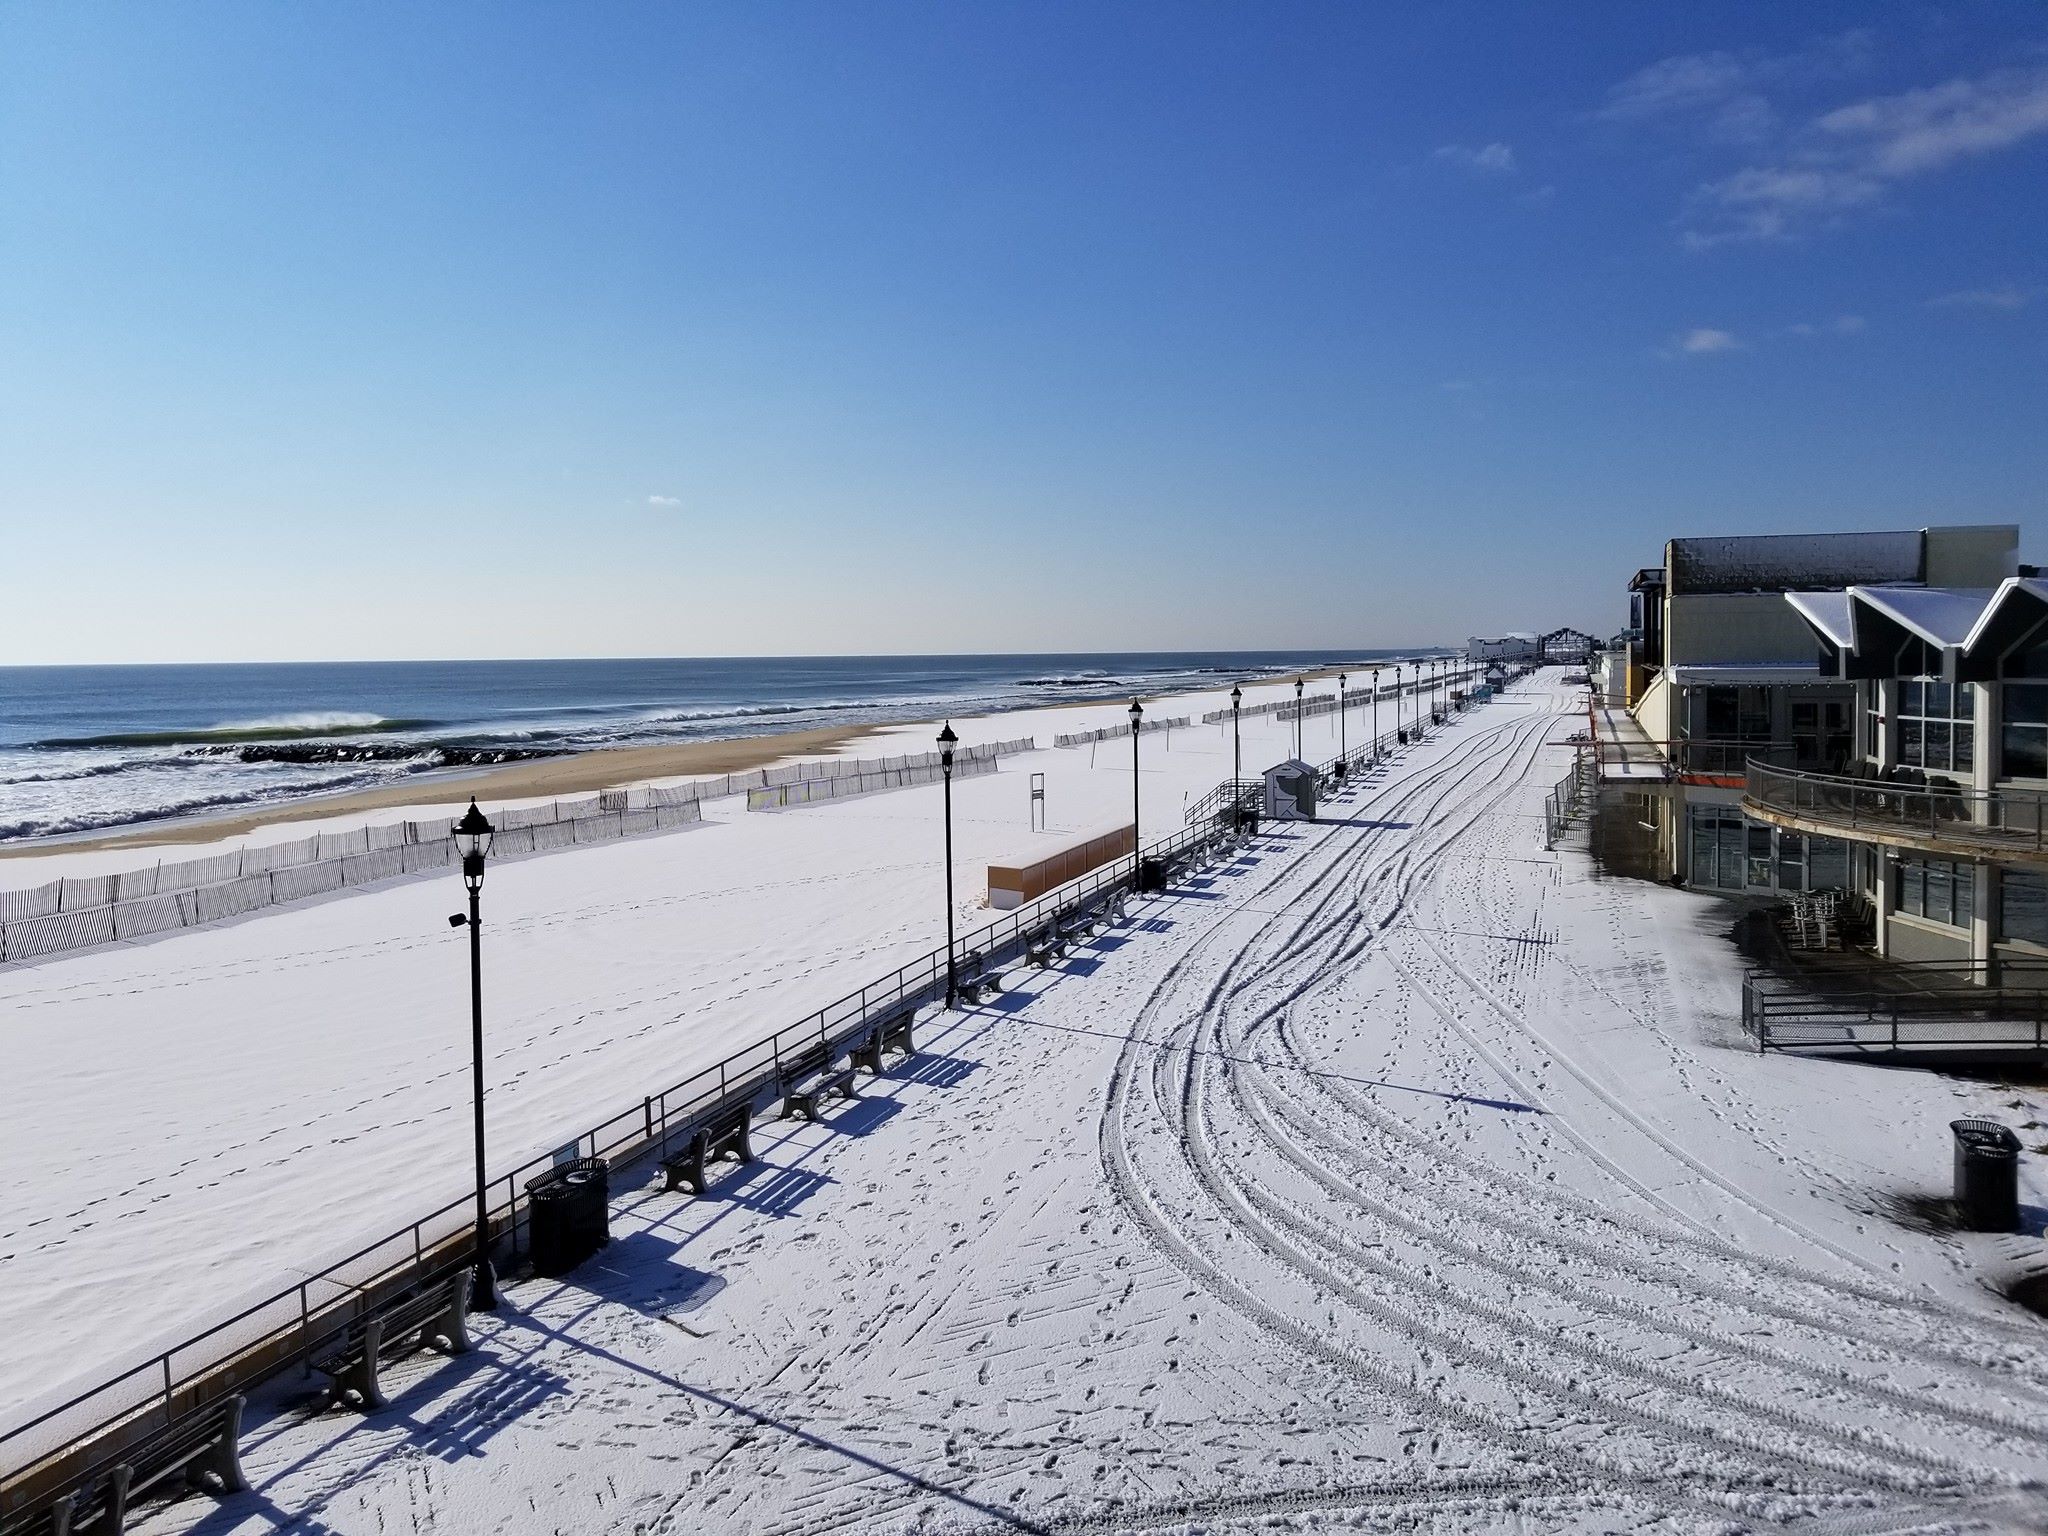 Snow-covered beach on the Jersey Shore during winter